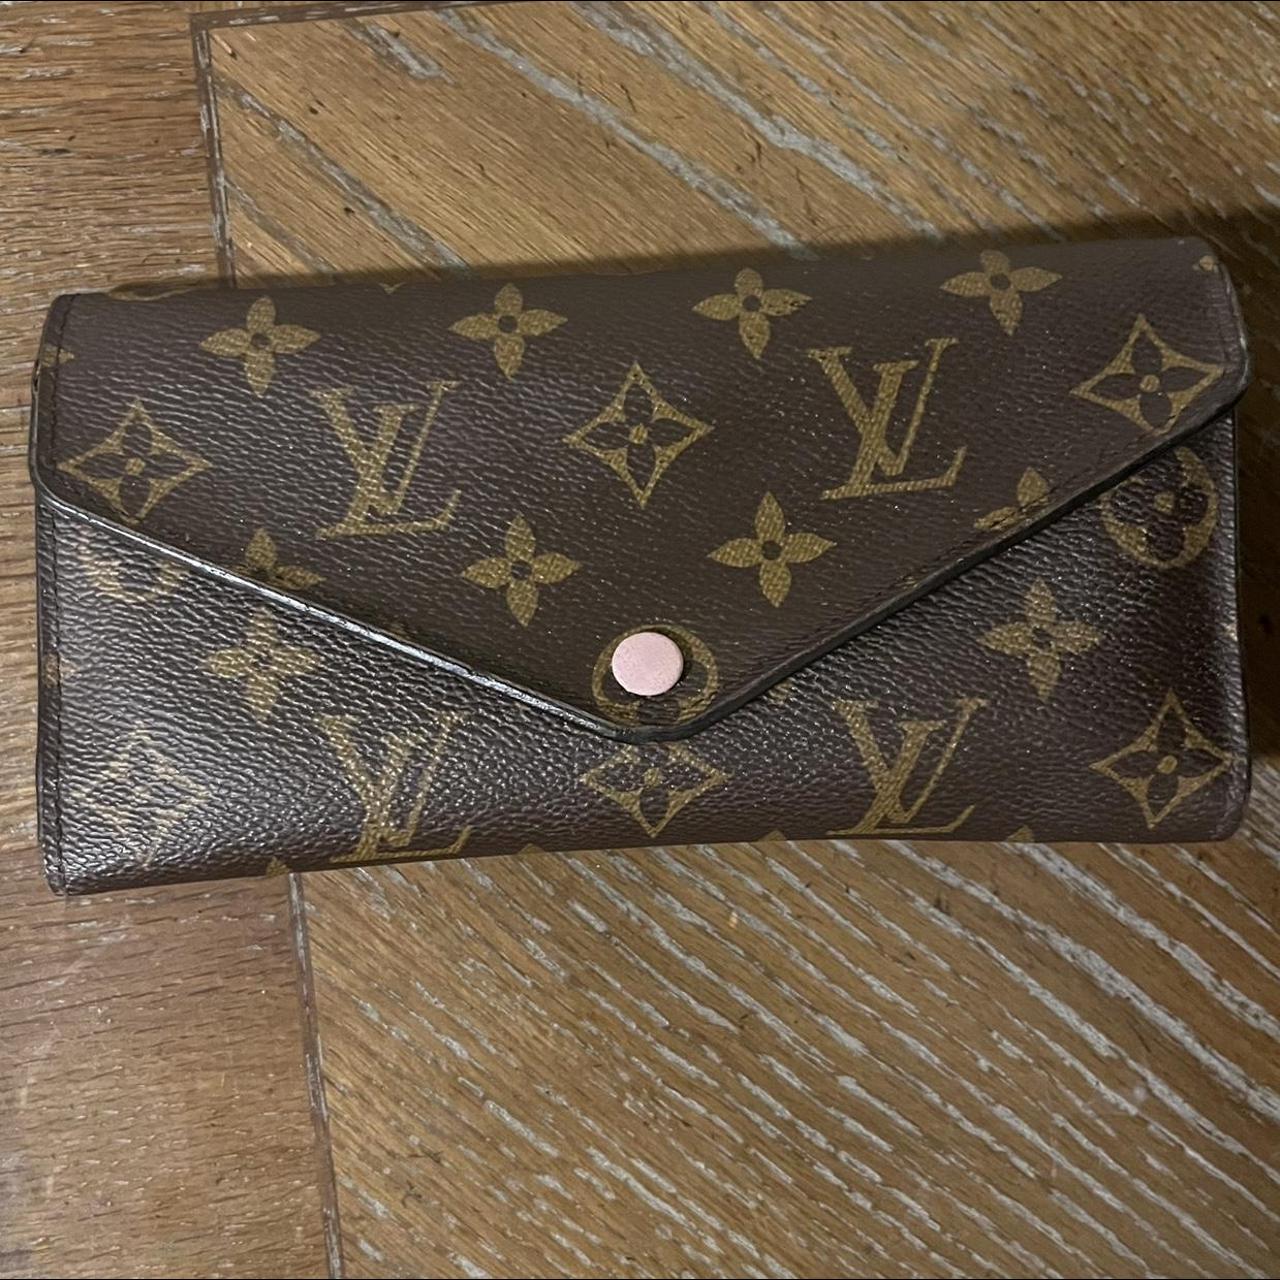 pink and brown louis vuittons wallet